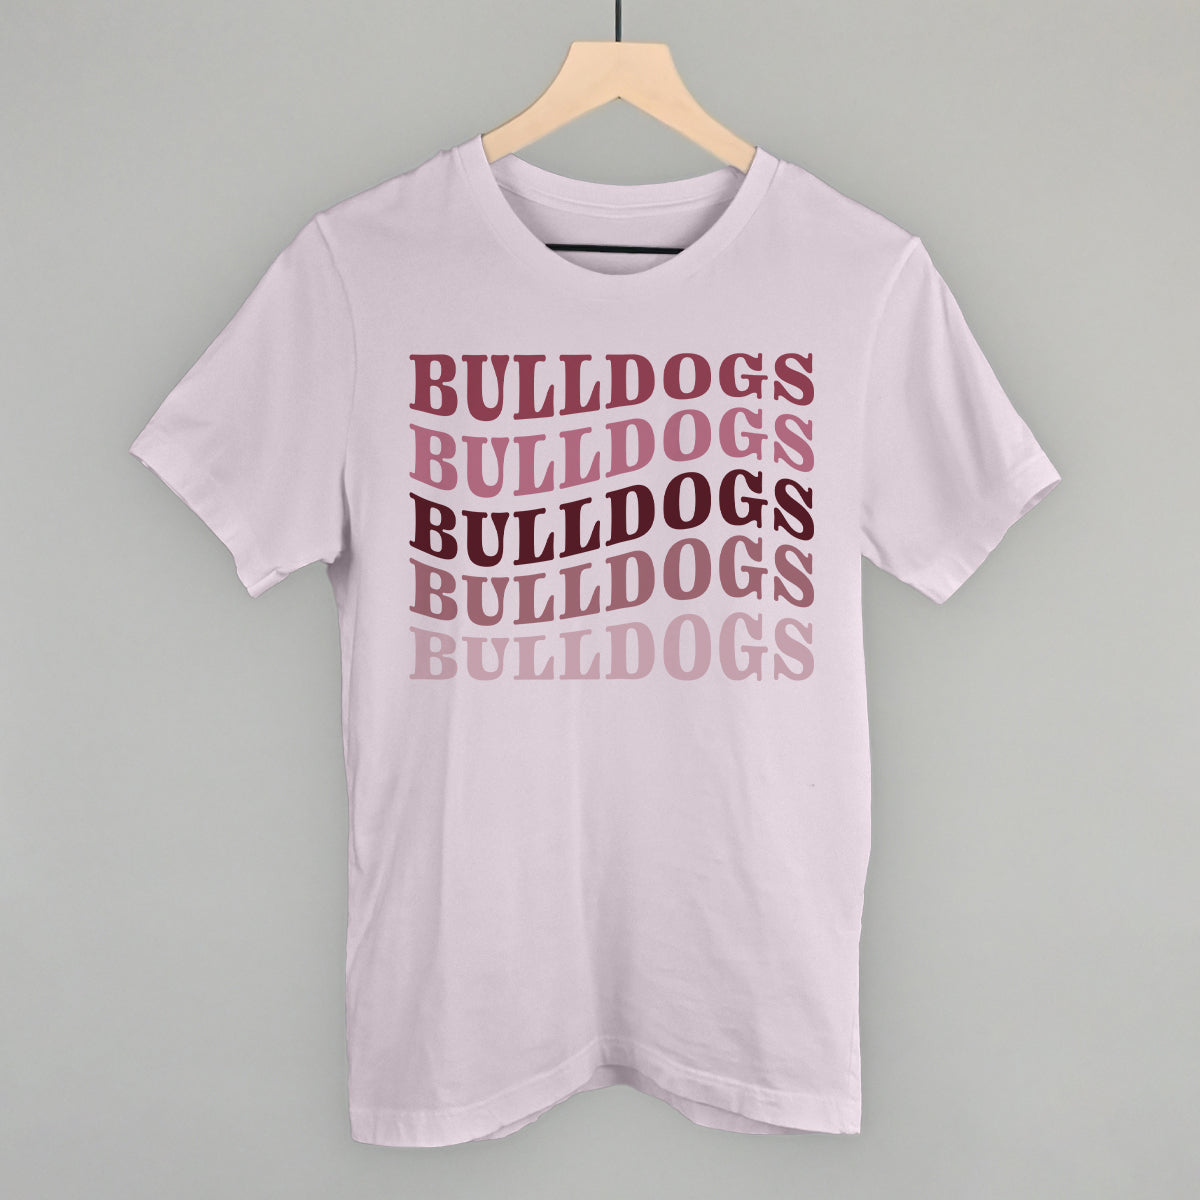 Bulldogs (Repeated Wave)